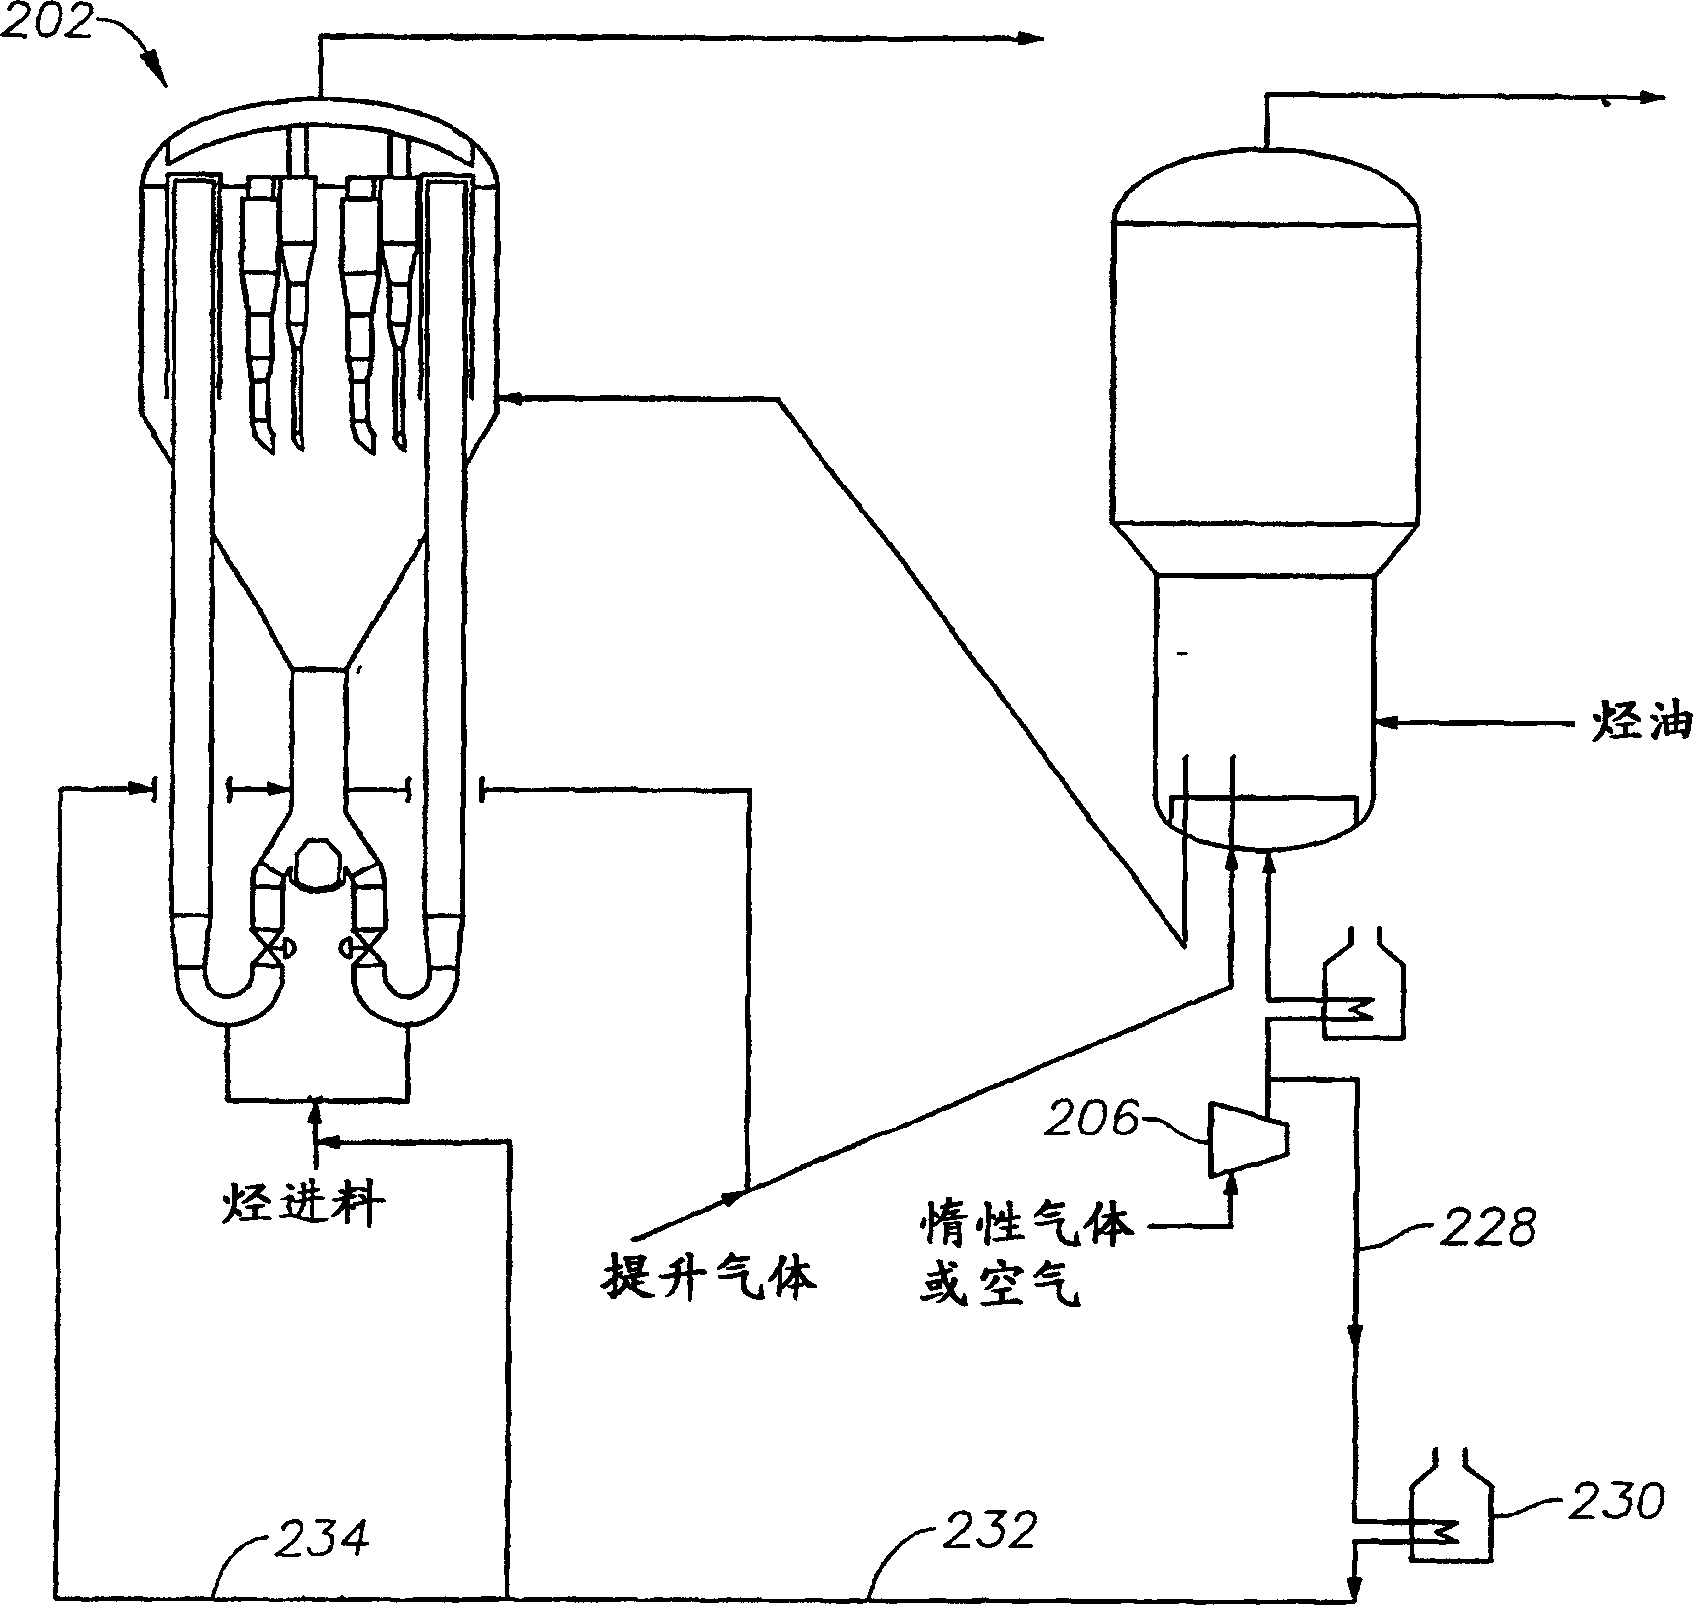 Method of starting up a reaction system